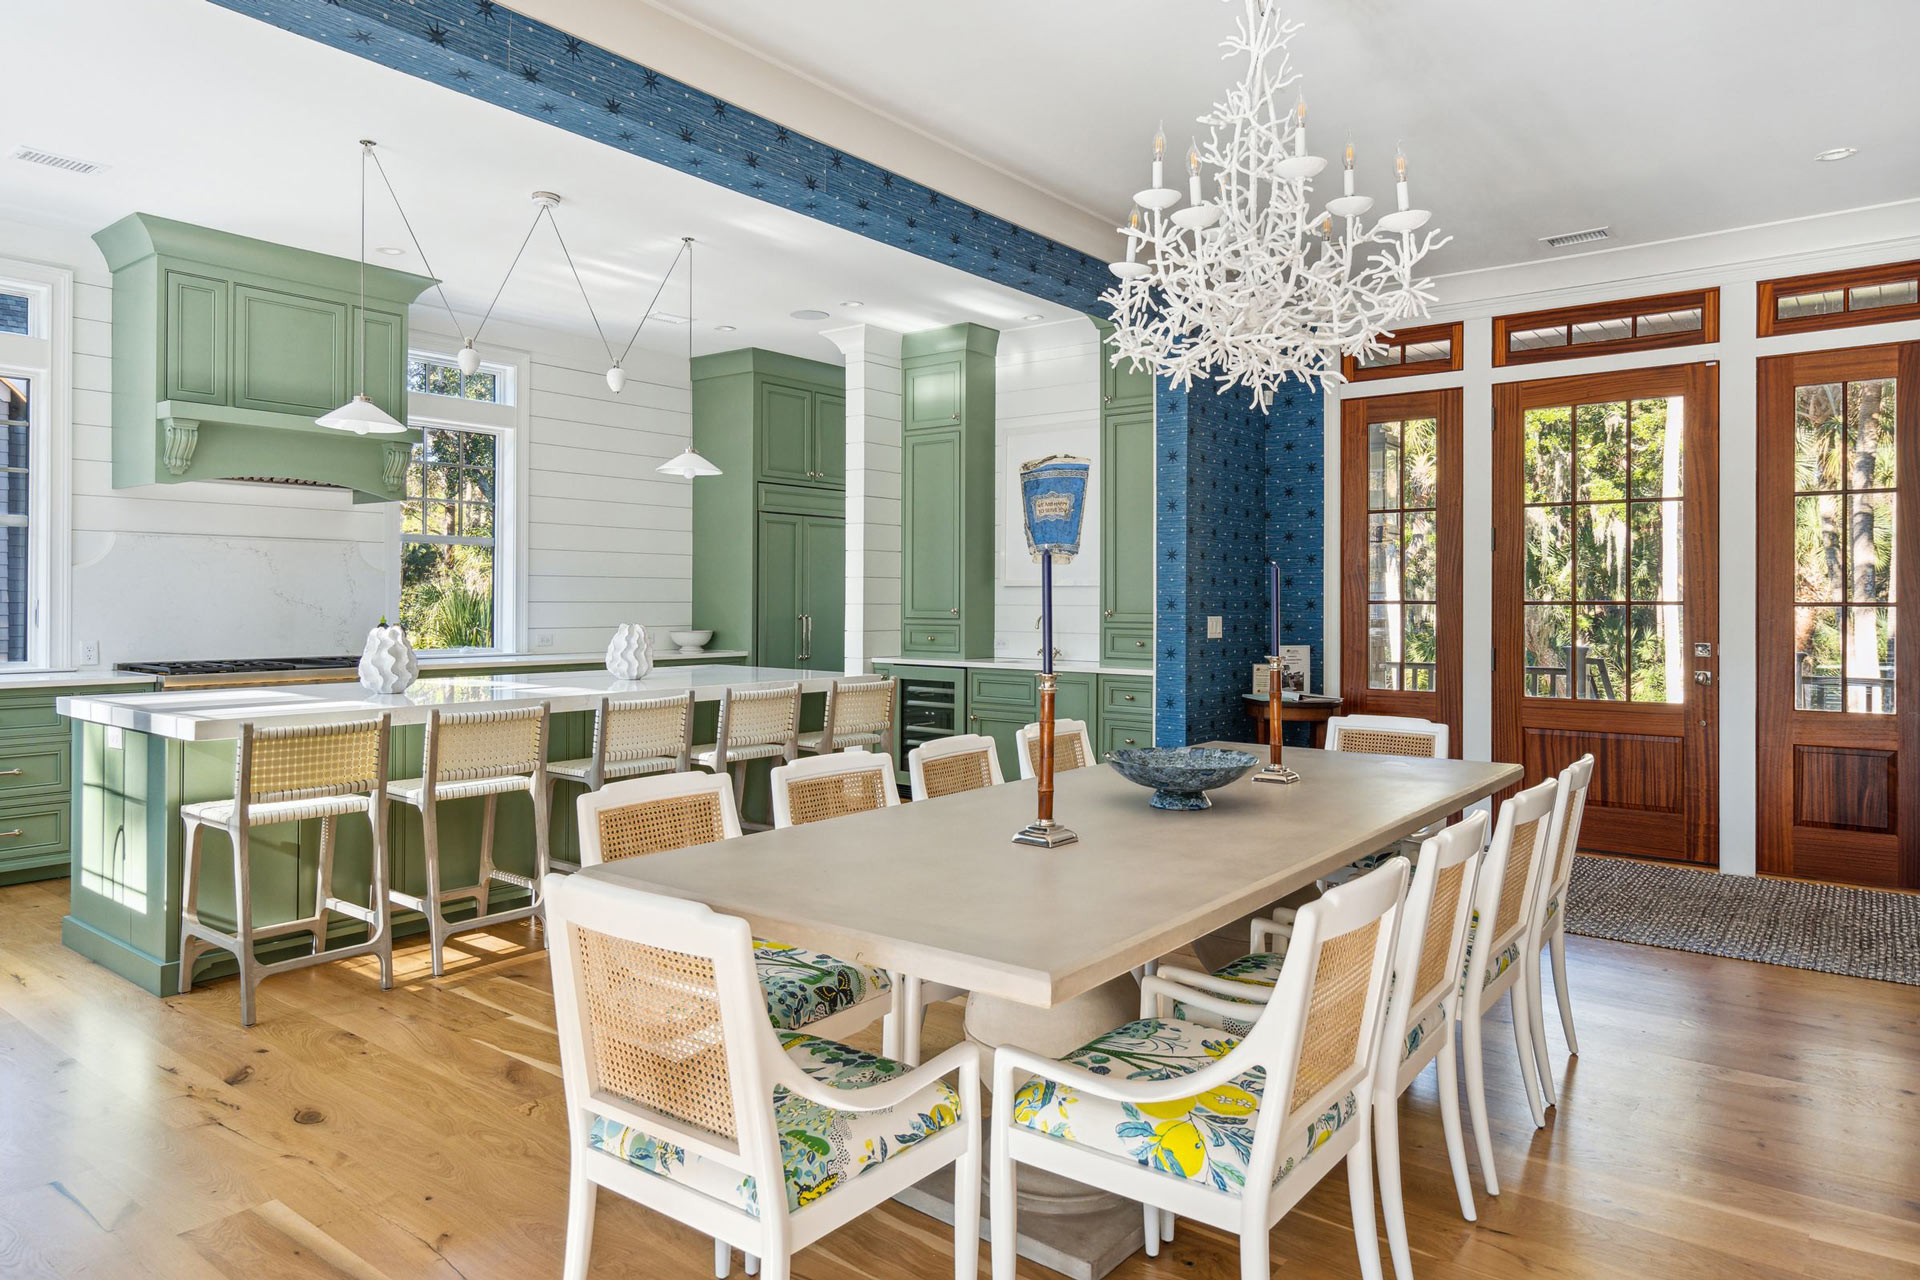 Large open dining area with 10 seat table (cane-back seats with upholstery bottoms) right next to large open kitchen. Blue, green, yellow palette contrasts medium and deep-toned stained wood